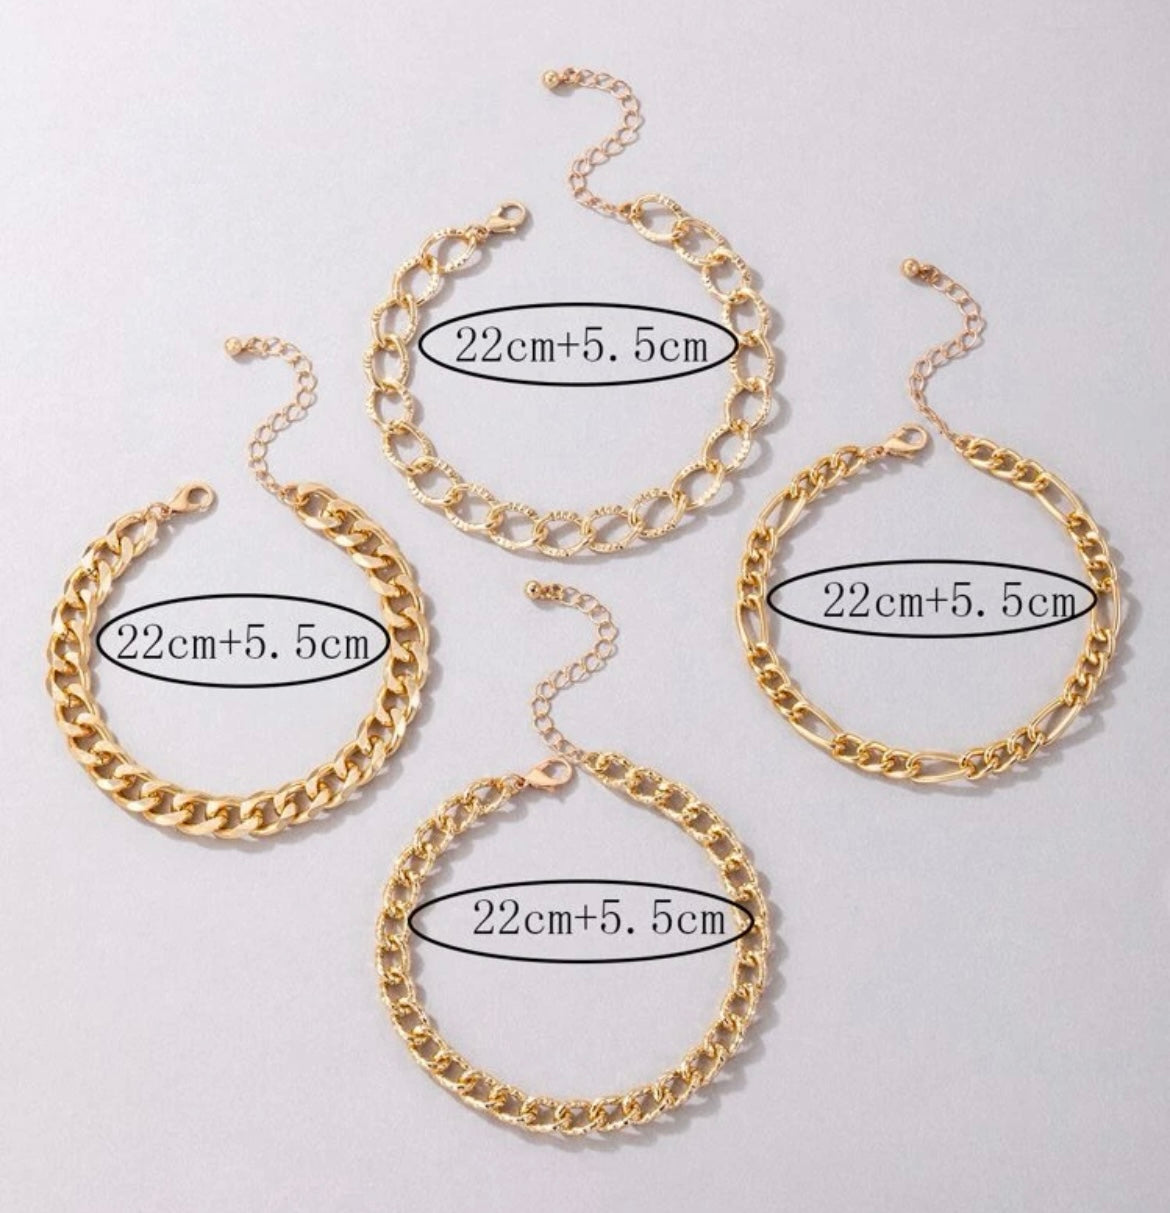 Chained 4-Piece Anklet Set